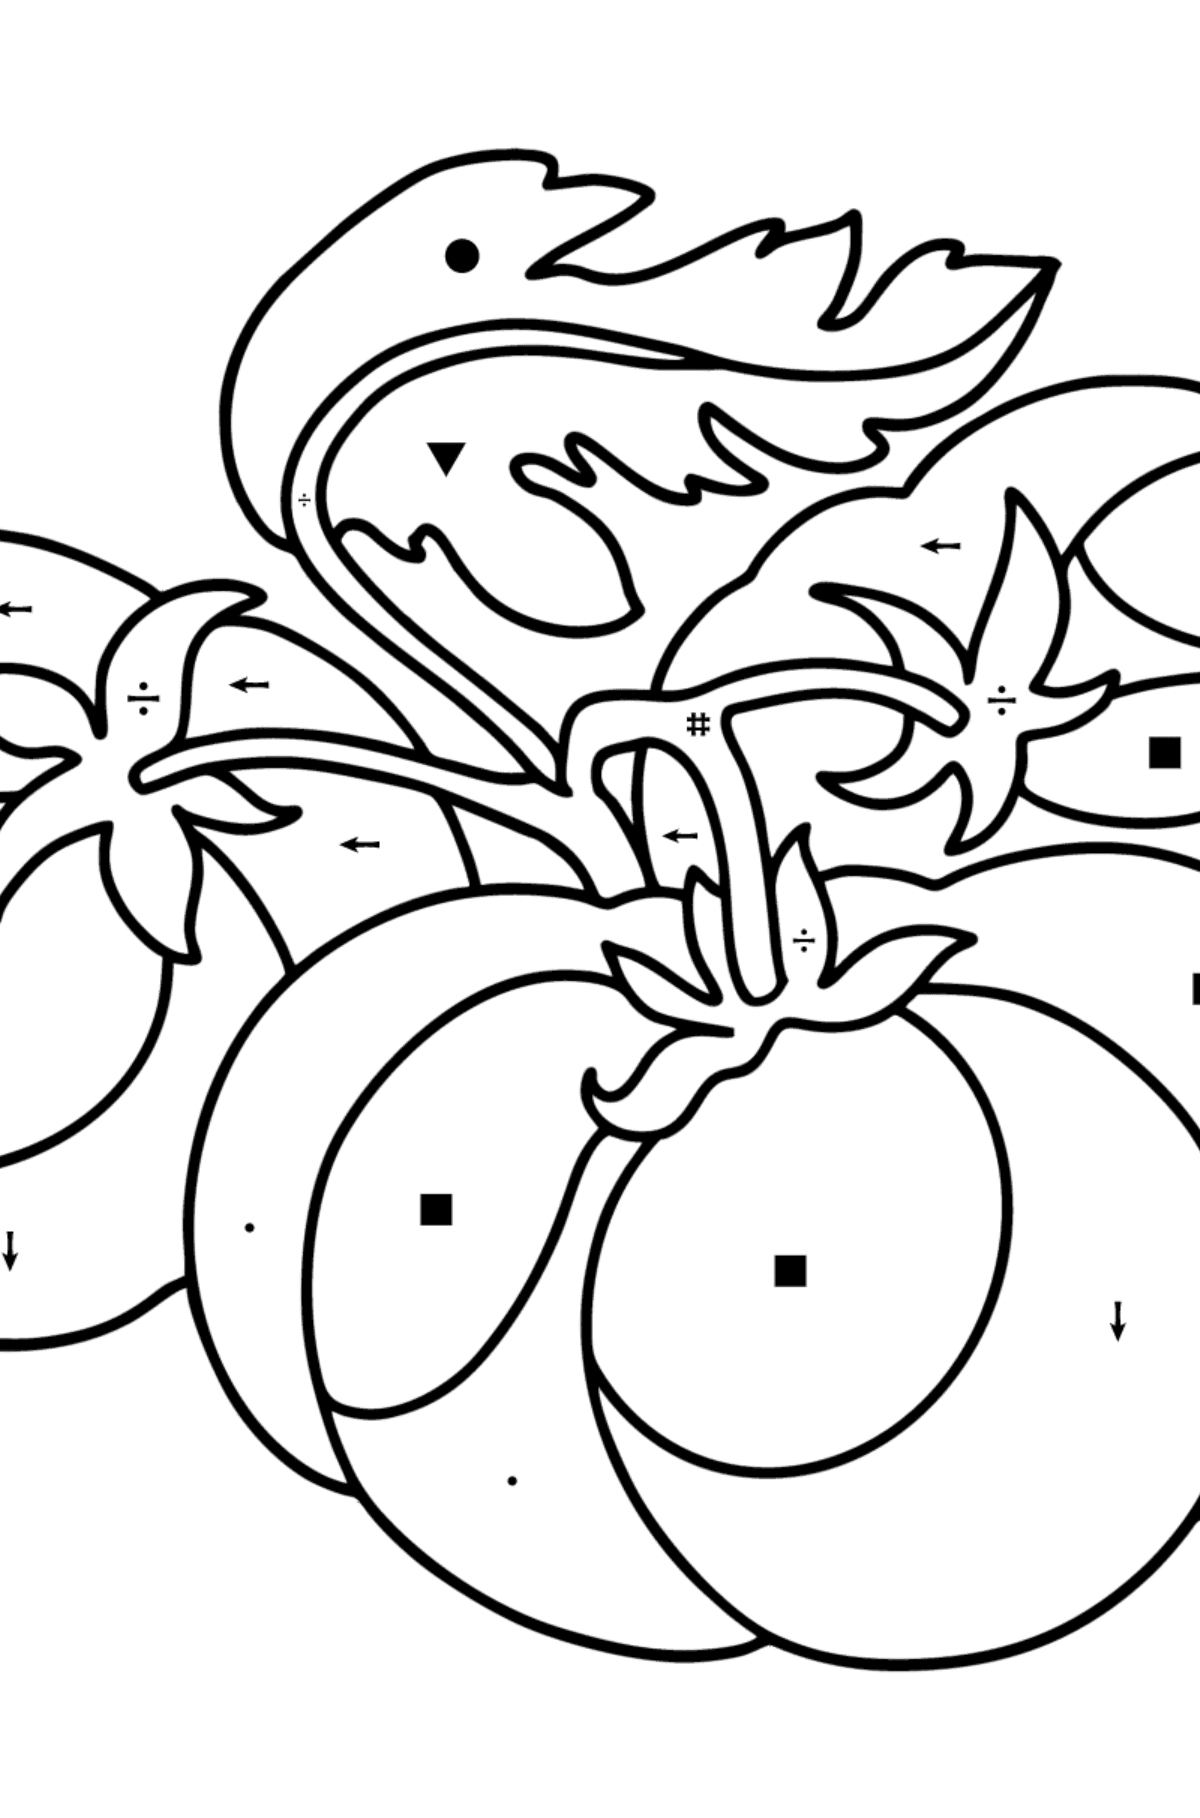 Large tomatoes сoloring page - Coloring by Symbols for Kids